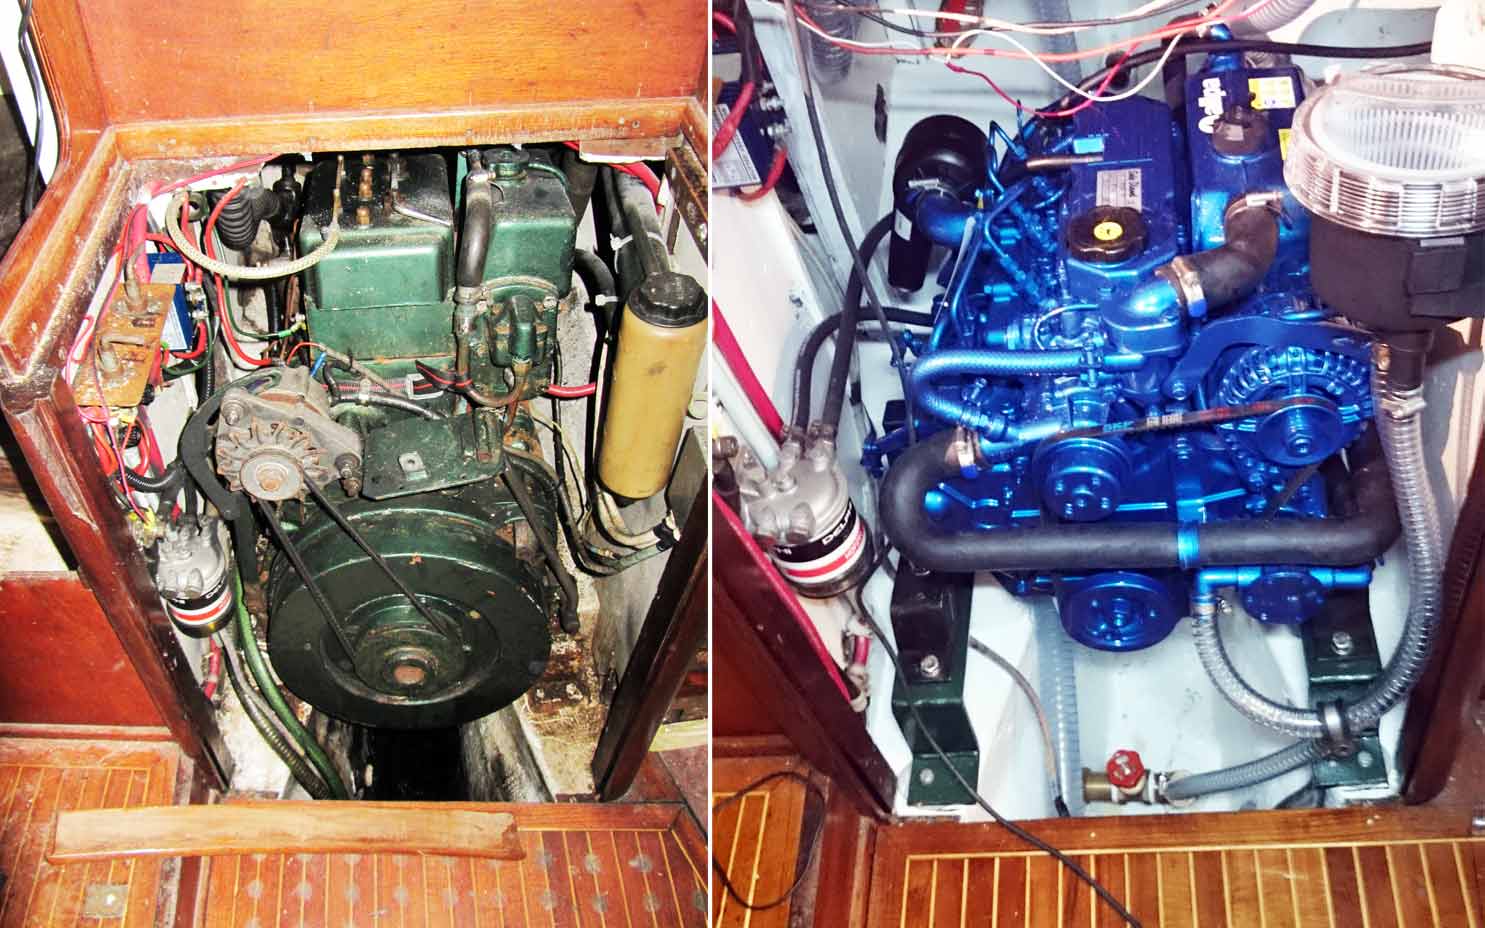 Perfect new Engine in a freshly painted hull/bilge.